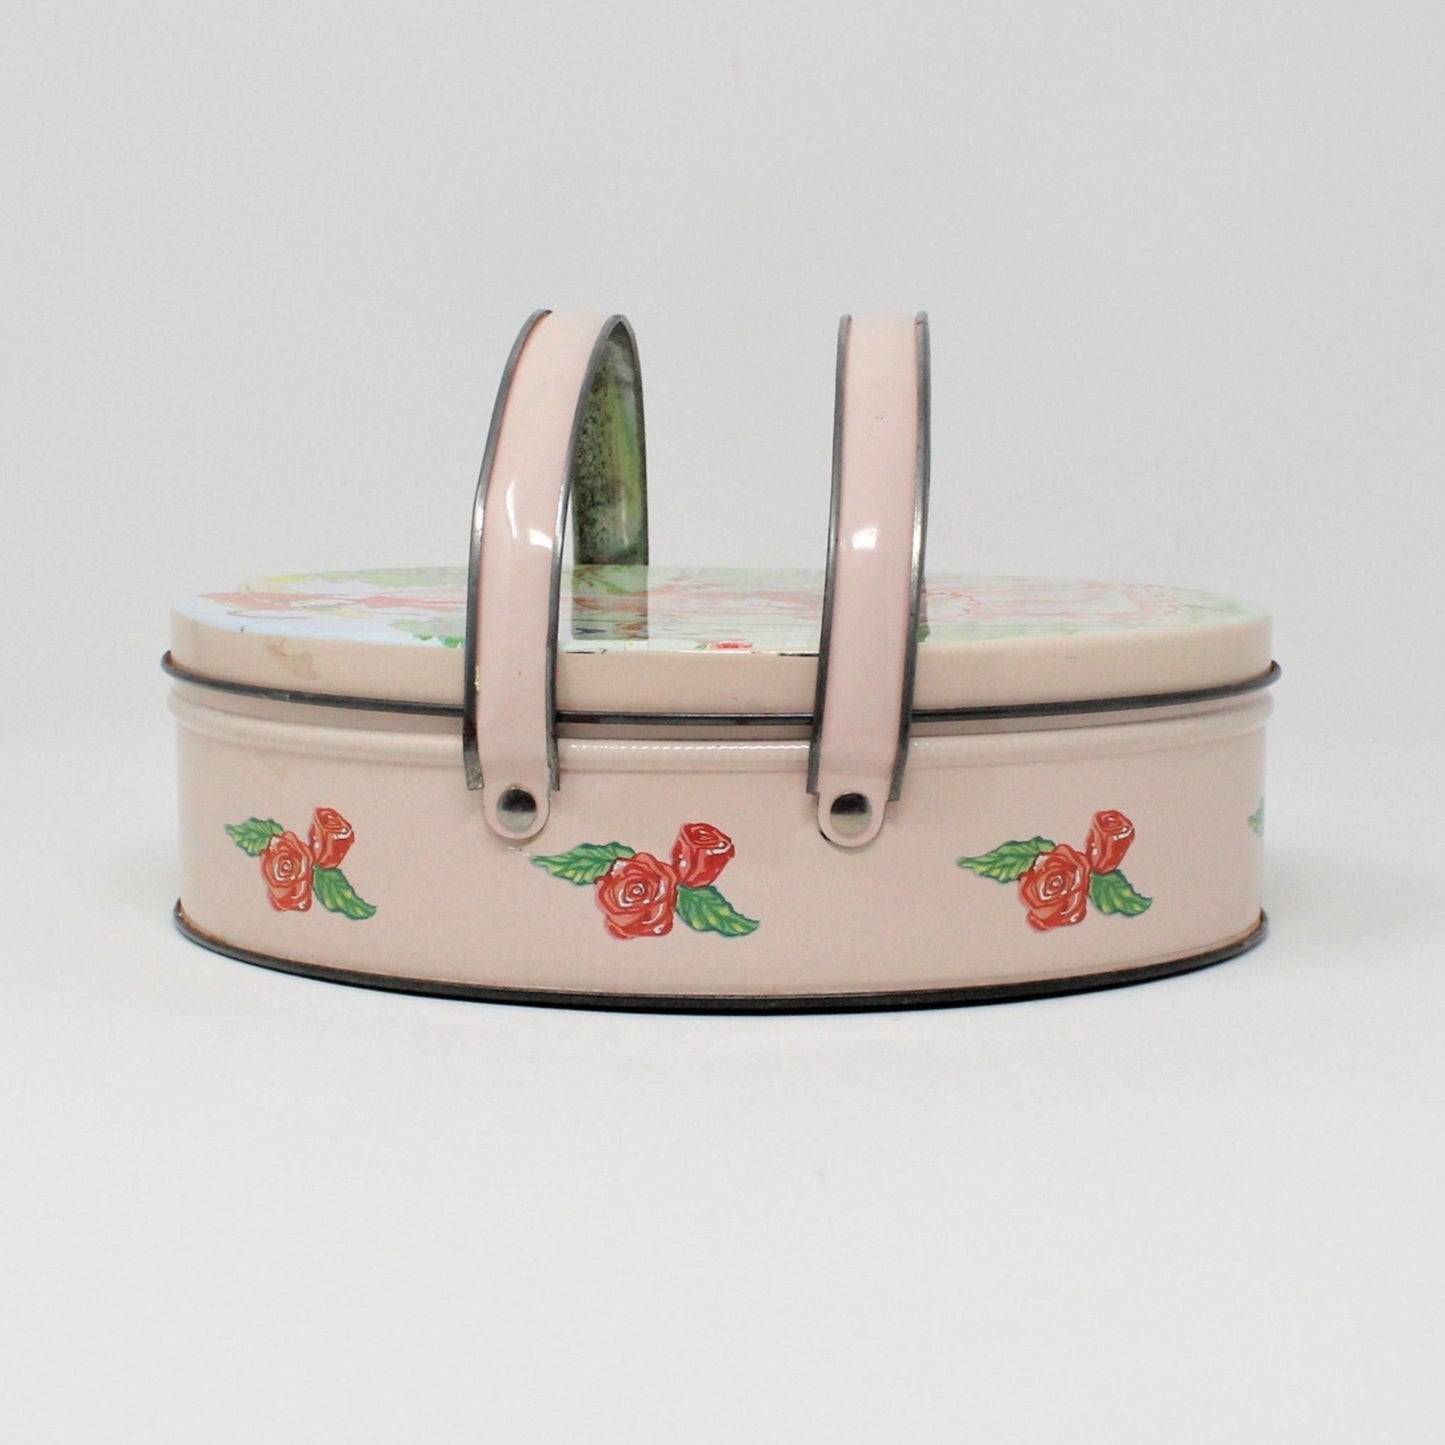 Gift Tin / Cookie Tin, ValleyBrook Farms, Victorian Country Girl, Pink Oval with Handles, Vintage